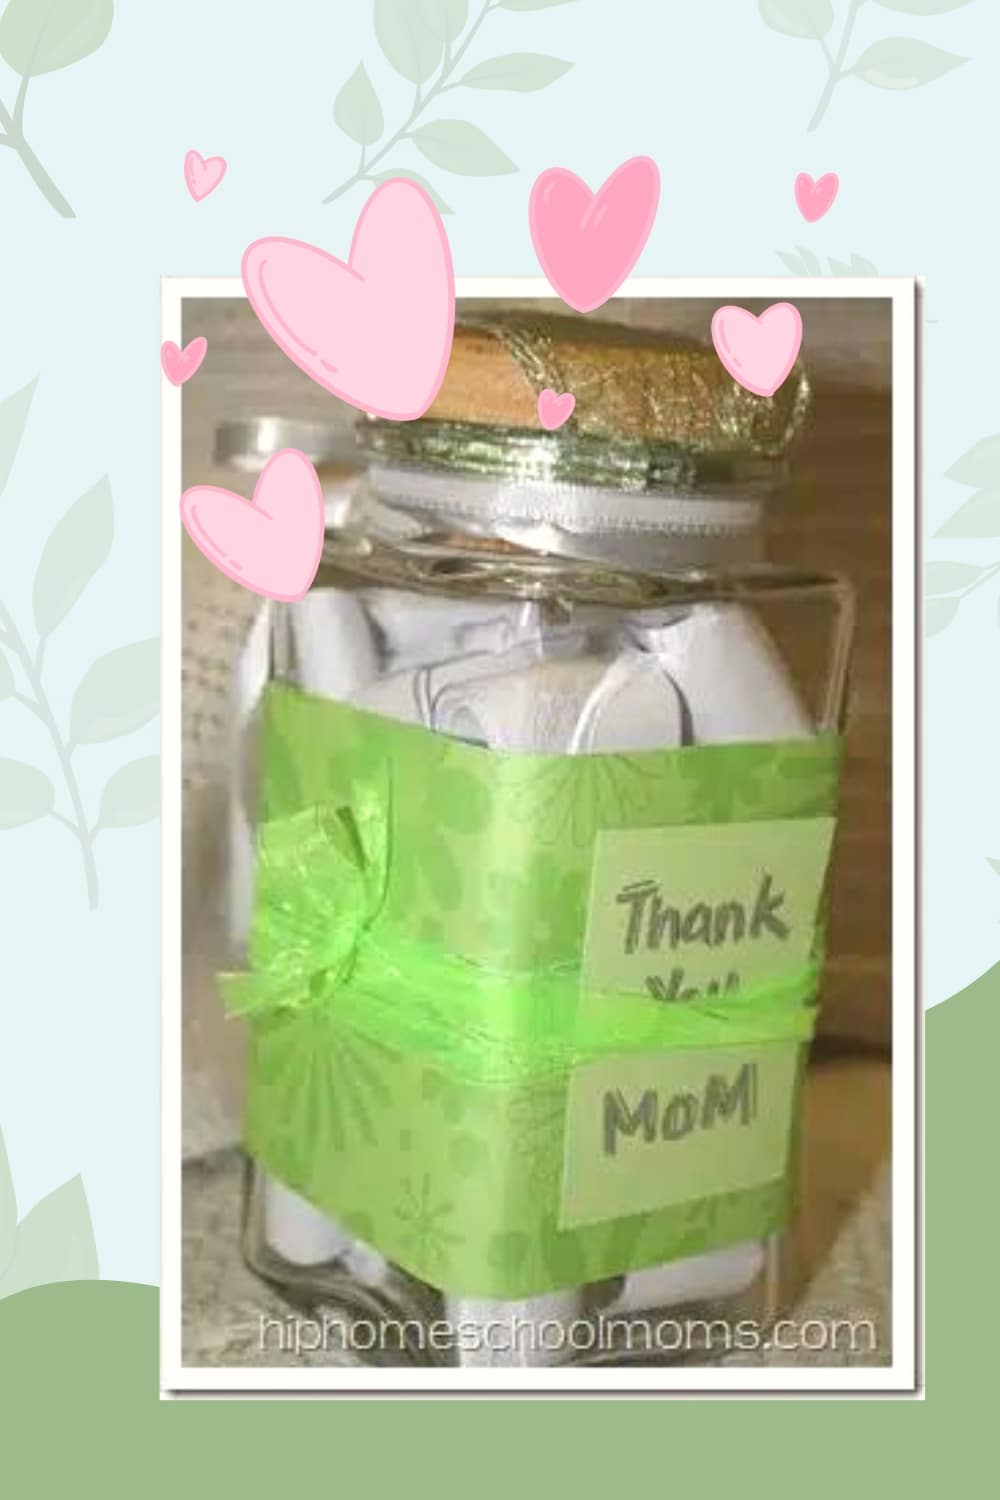 A Simple, Meaningful Mother’s Day Gift & A Giveaway Just for Moms!